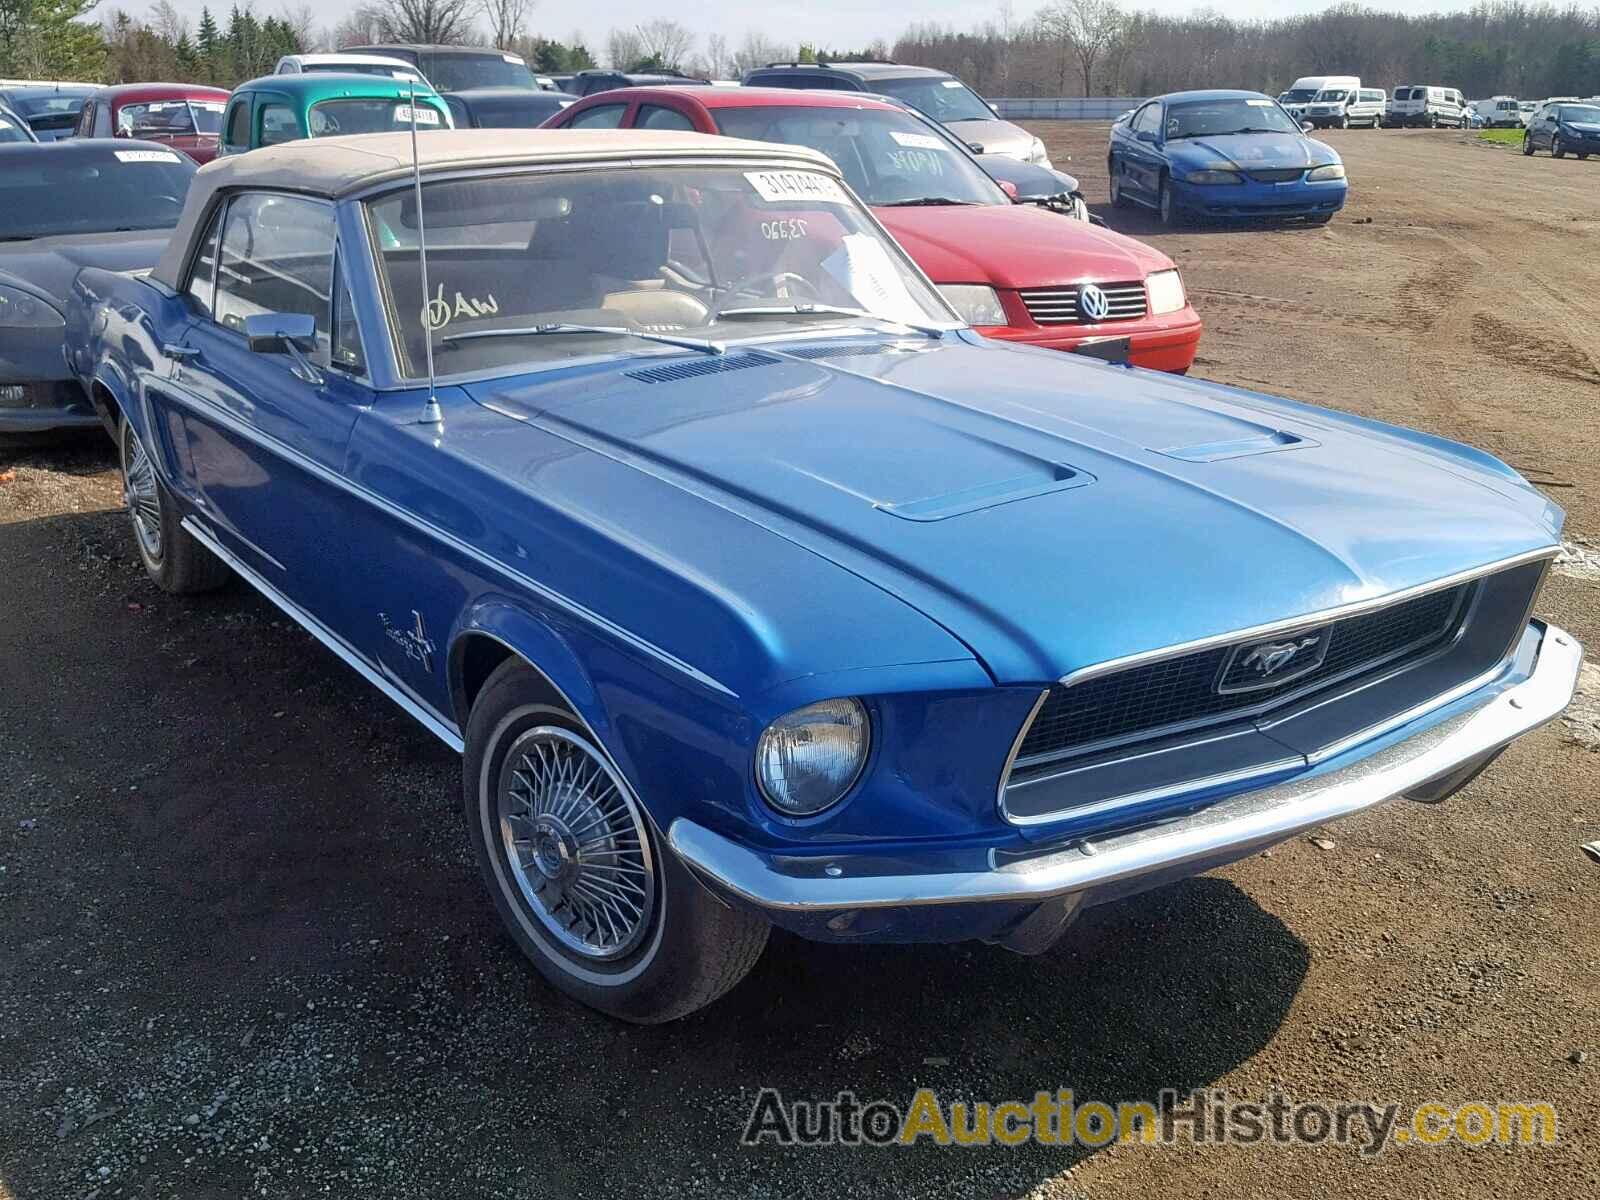 1968 FORD MUSTANG, 8F03C144455